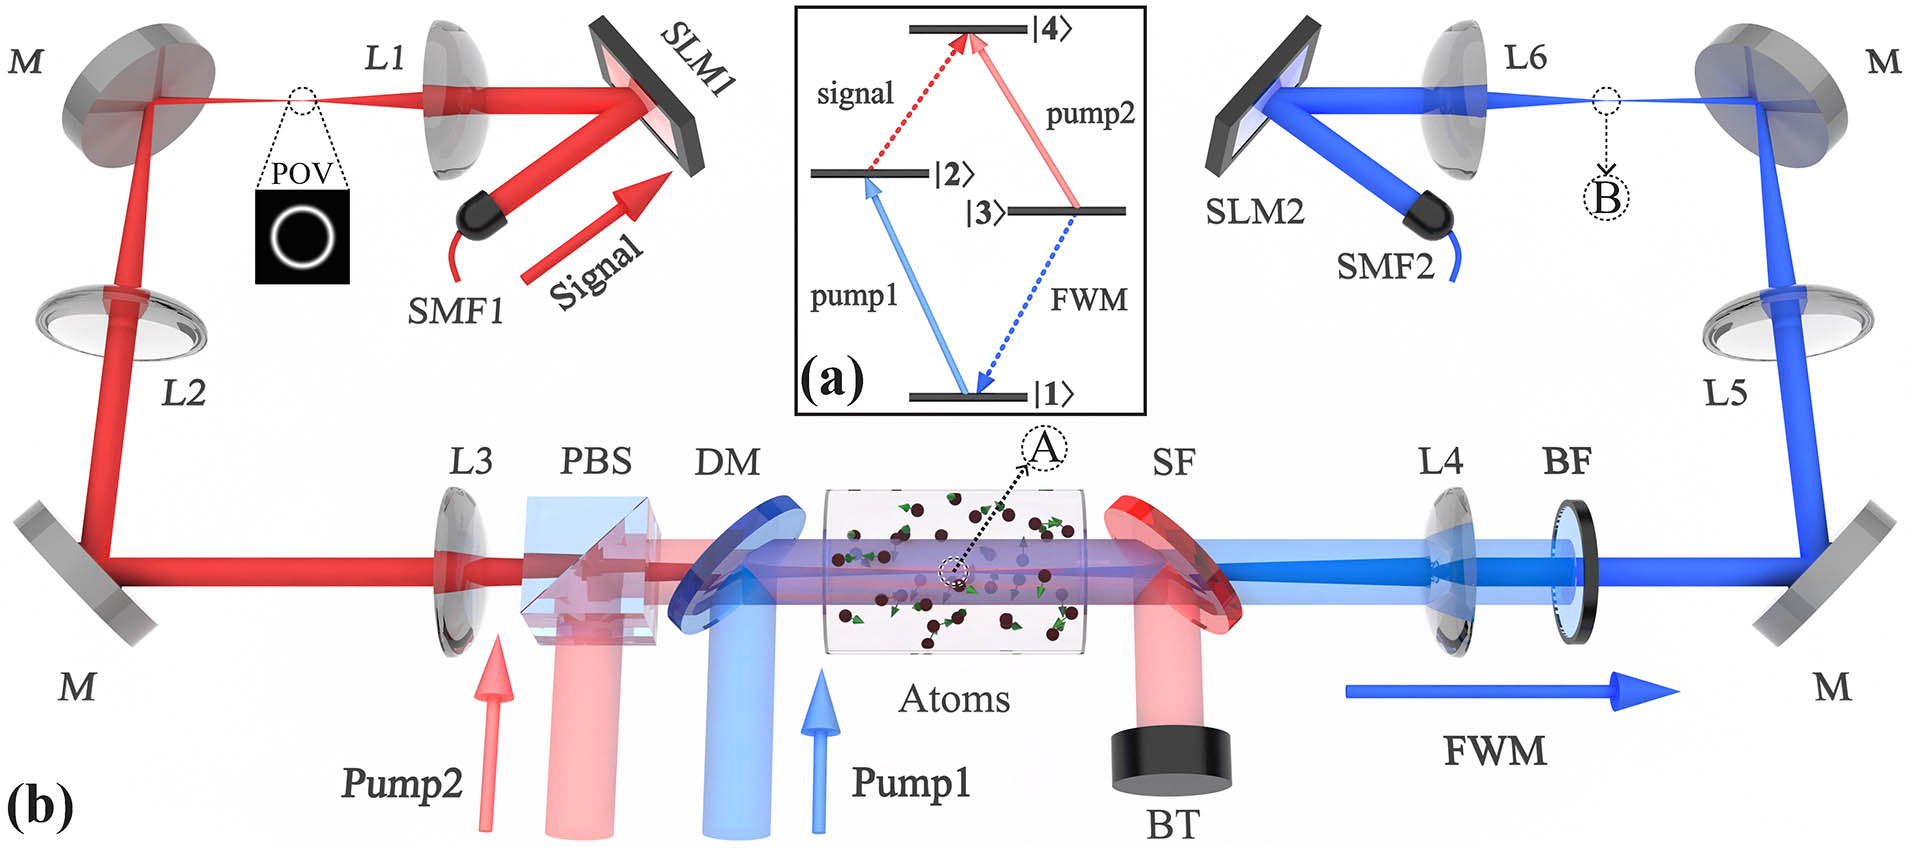 (a) Energy diagram of the diamond configuration. (b) The schematic diagram of the experimental setup. SLM 1 and SLM 2, spatial light modulator; PBS, polarizing beam splitter; DM, long-pass dichroic mirror; SF, short-pass filter; BF, band-pass filter; BT, beam traps; SMF 1 and SMF 2, single-mode fiber; M, mirror. The focal lengths of lenses L1, L2, L3, L4, L5, and L6 are 75, 150, 150, 150, 150, and 75 mm, respectively.